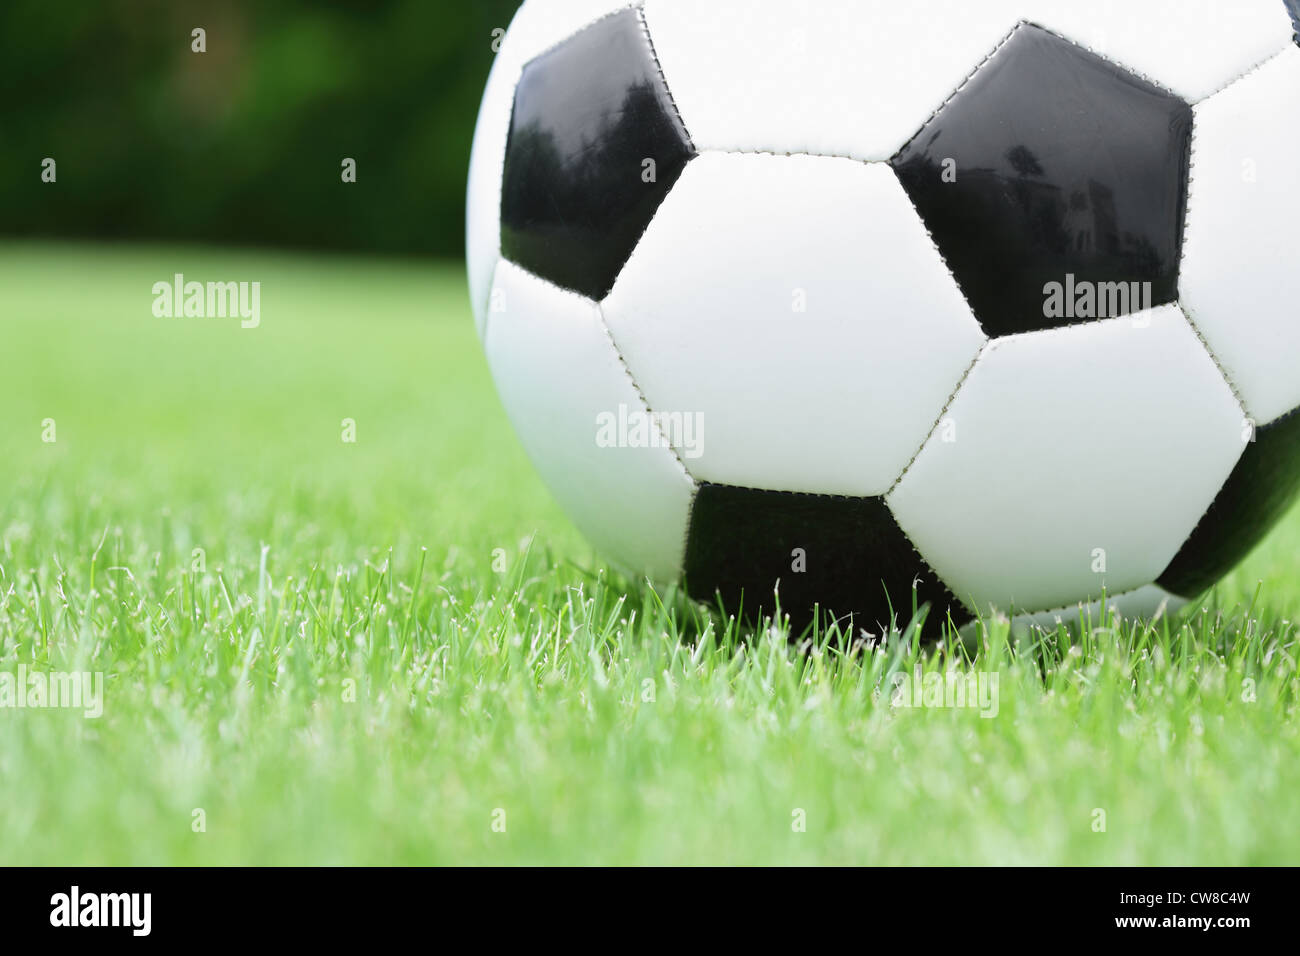 Close Up of Soccer Ball Banque D'Images